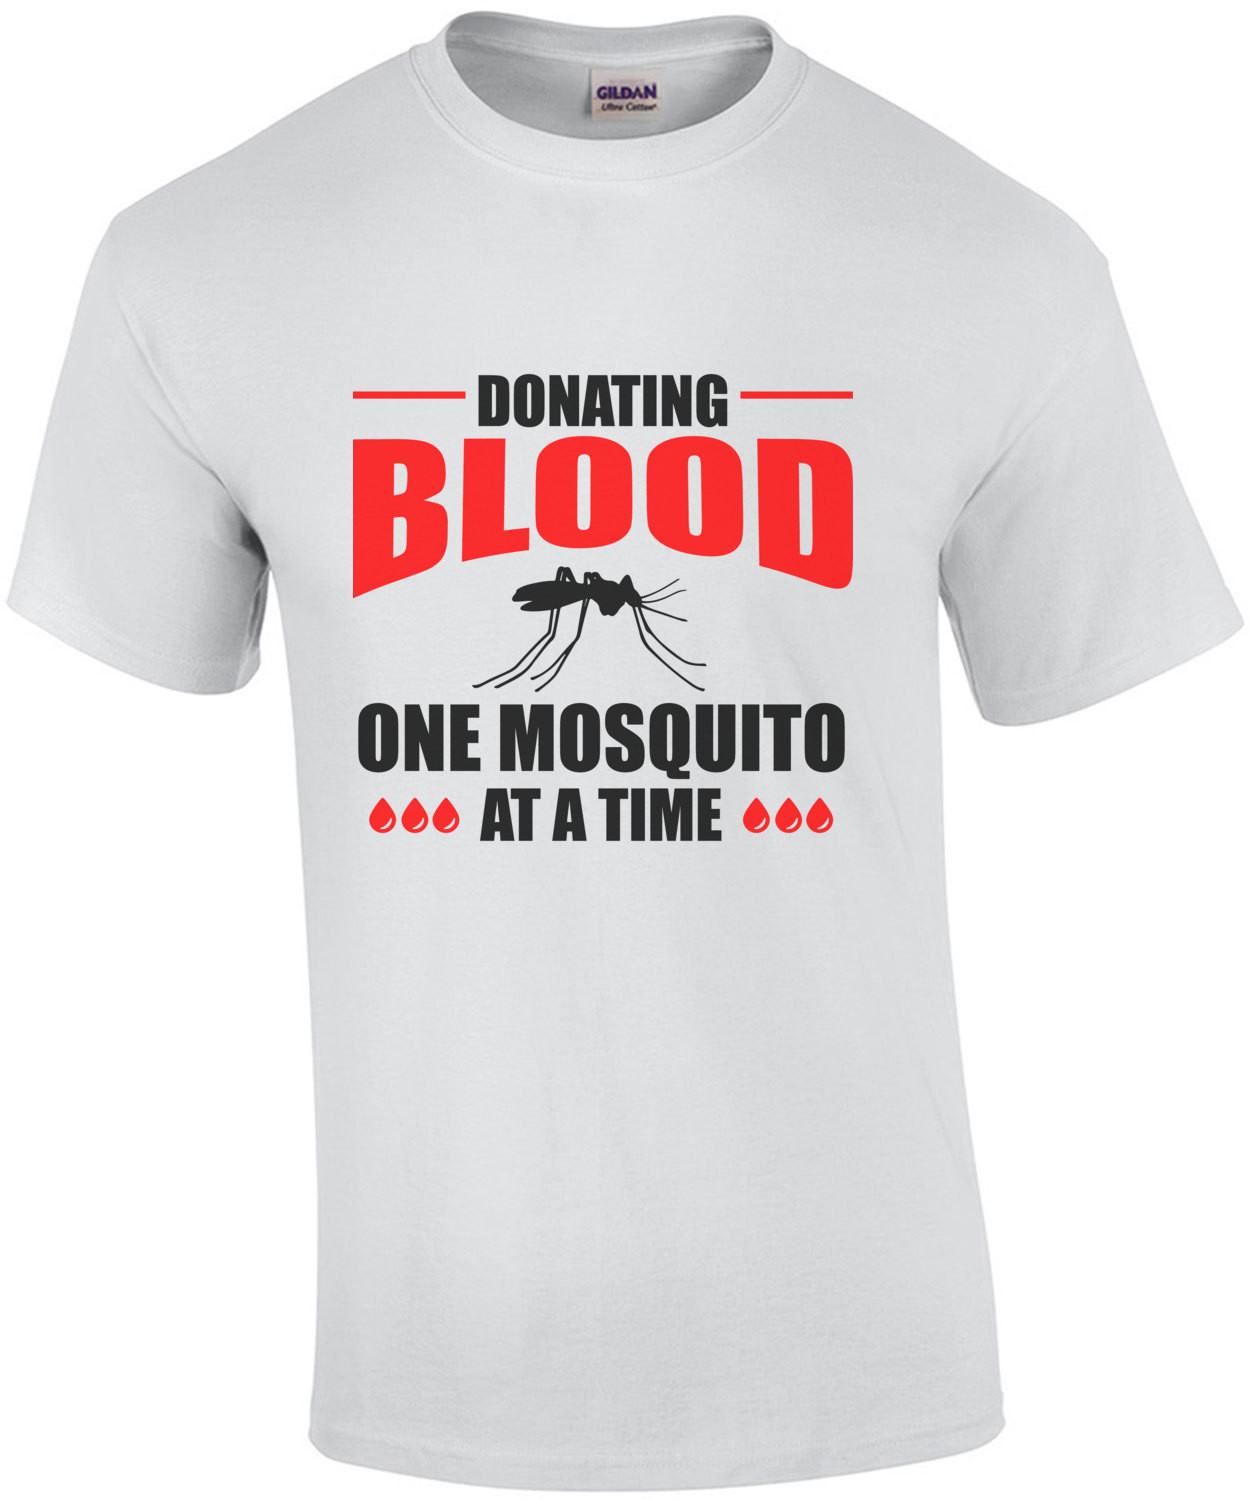 Donating blood - one mosquito at a time - camping t-shirt